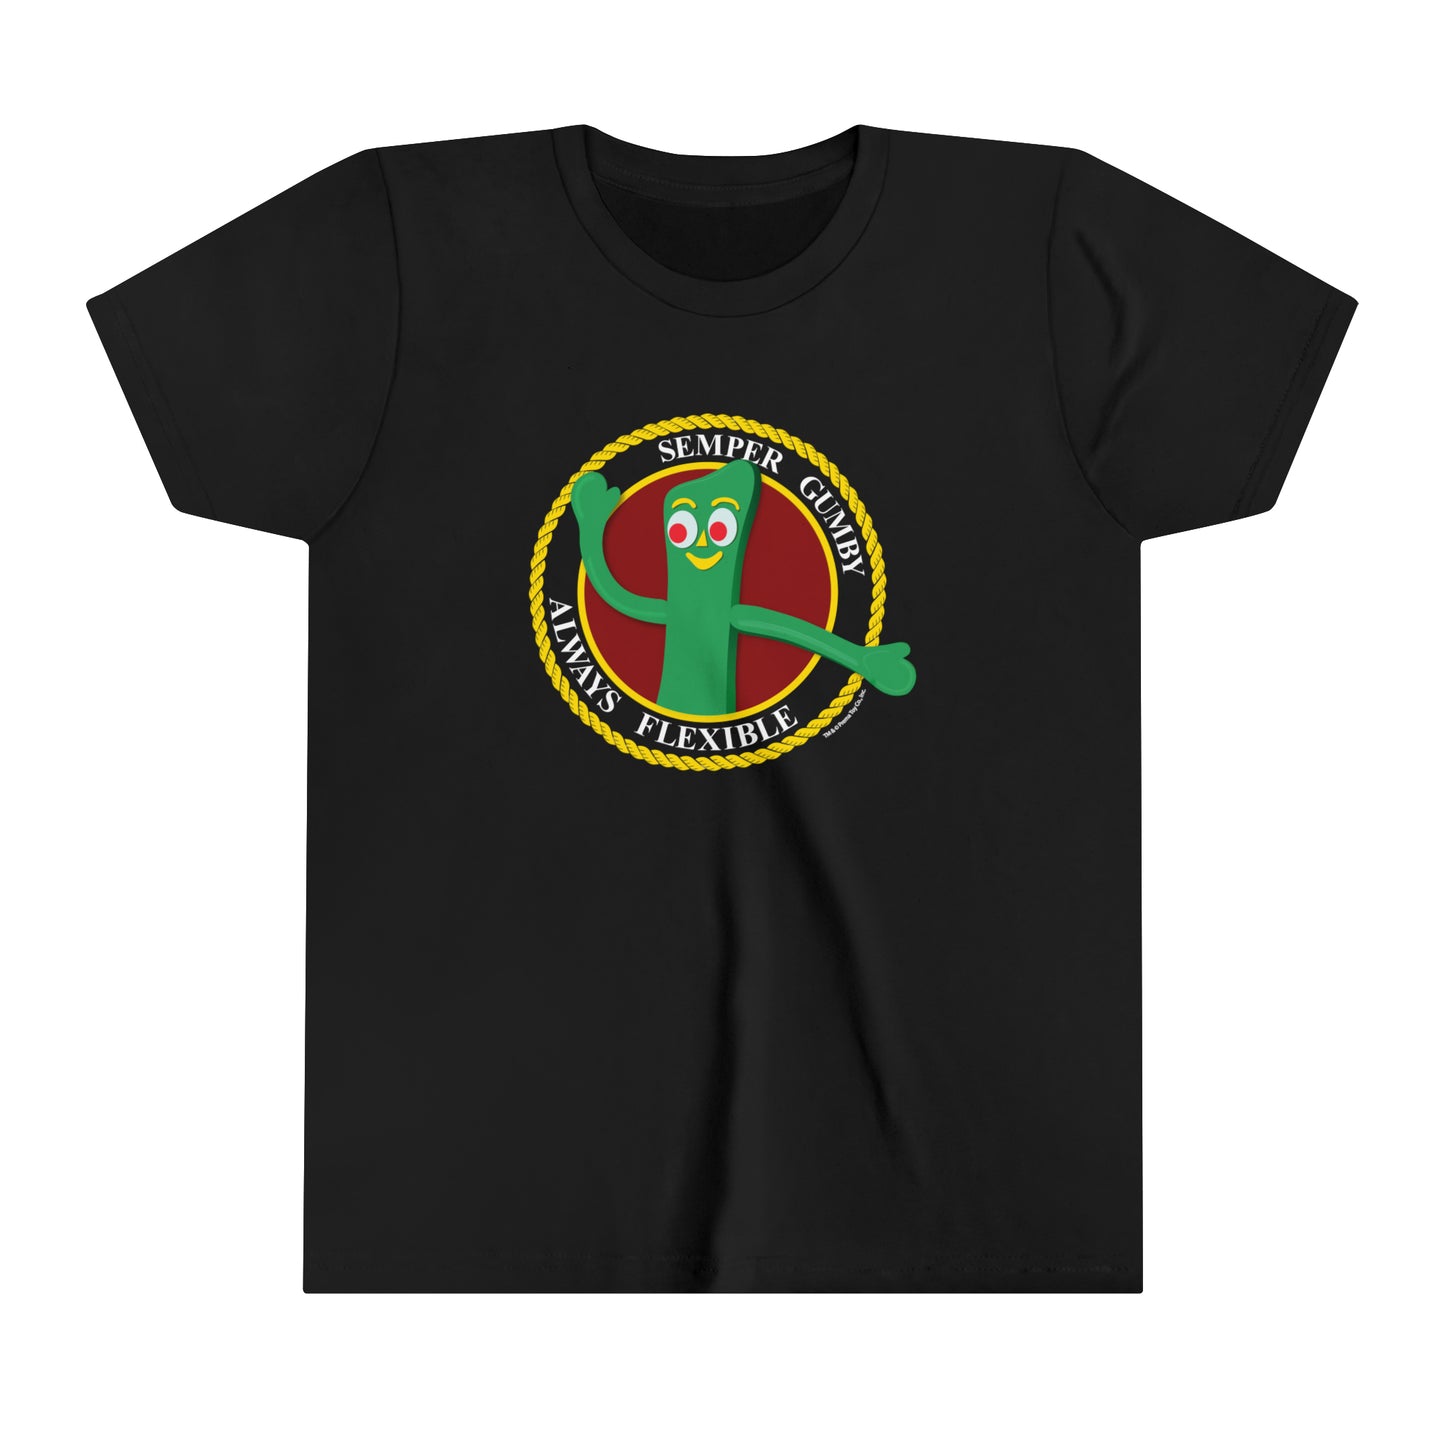 Youth Short Sleeve Tee: Semper Gumby